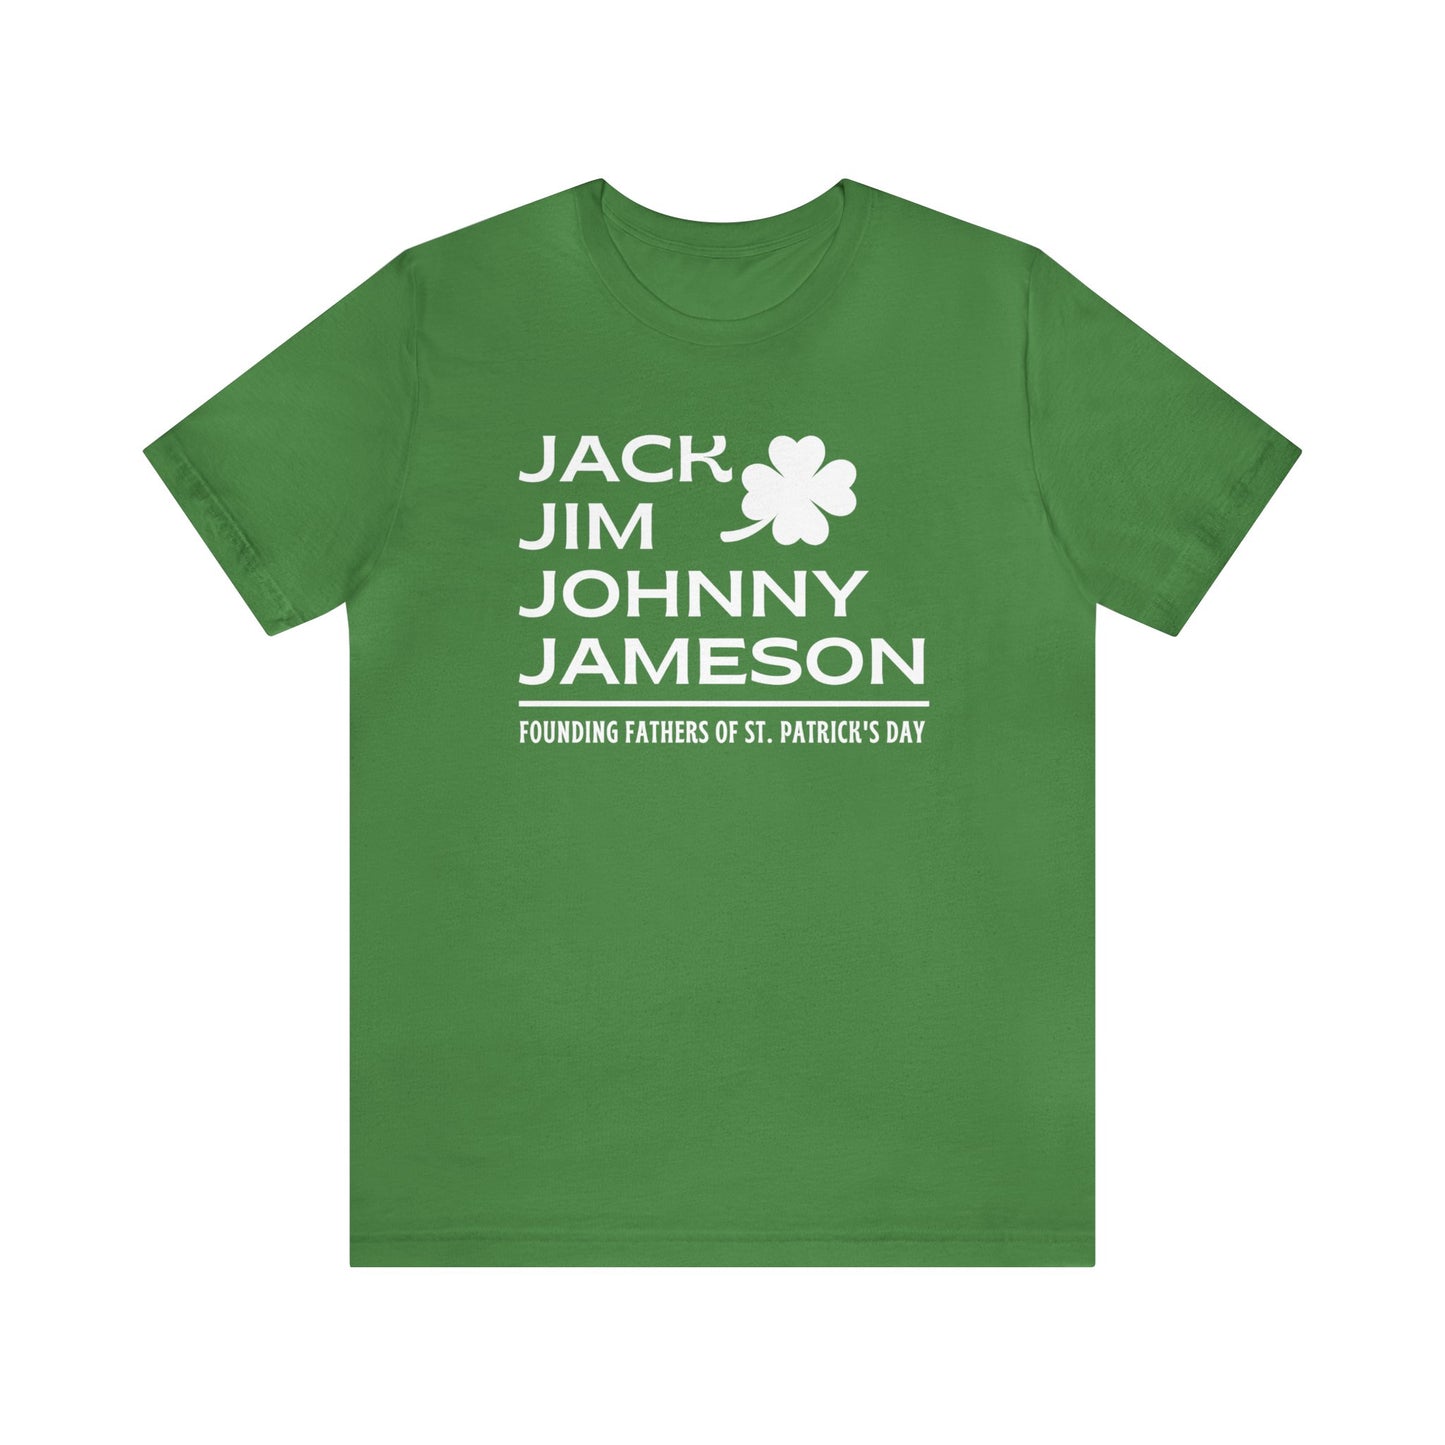 Founding Father's of St. Patrick's Day Men's Tee